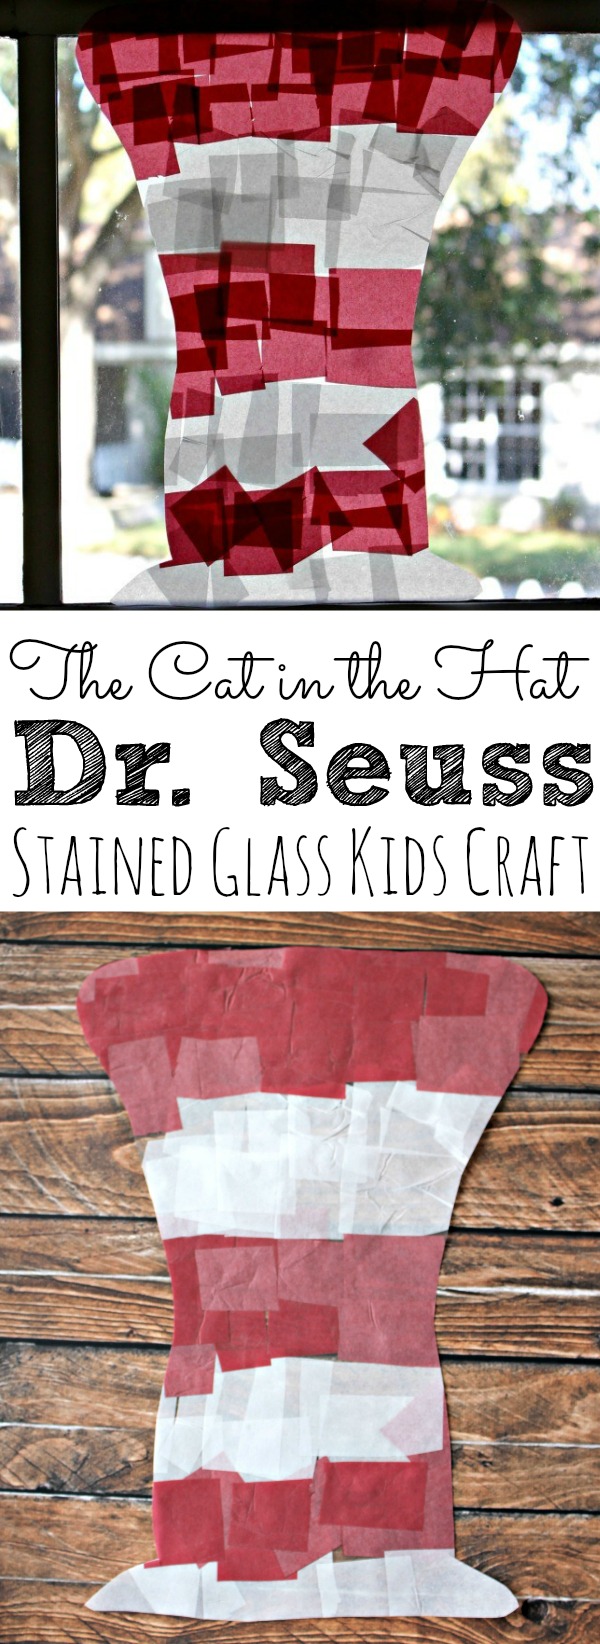 The Cat in the Hat Stained Glass Craft